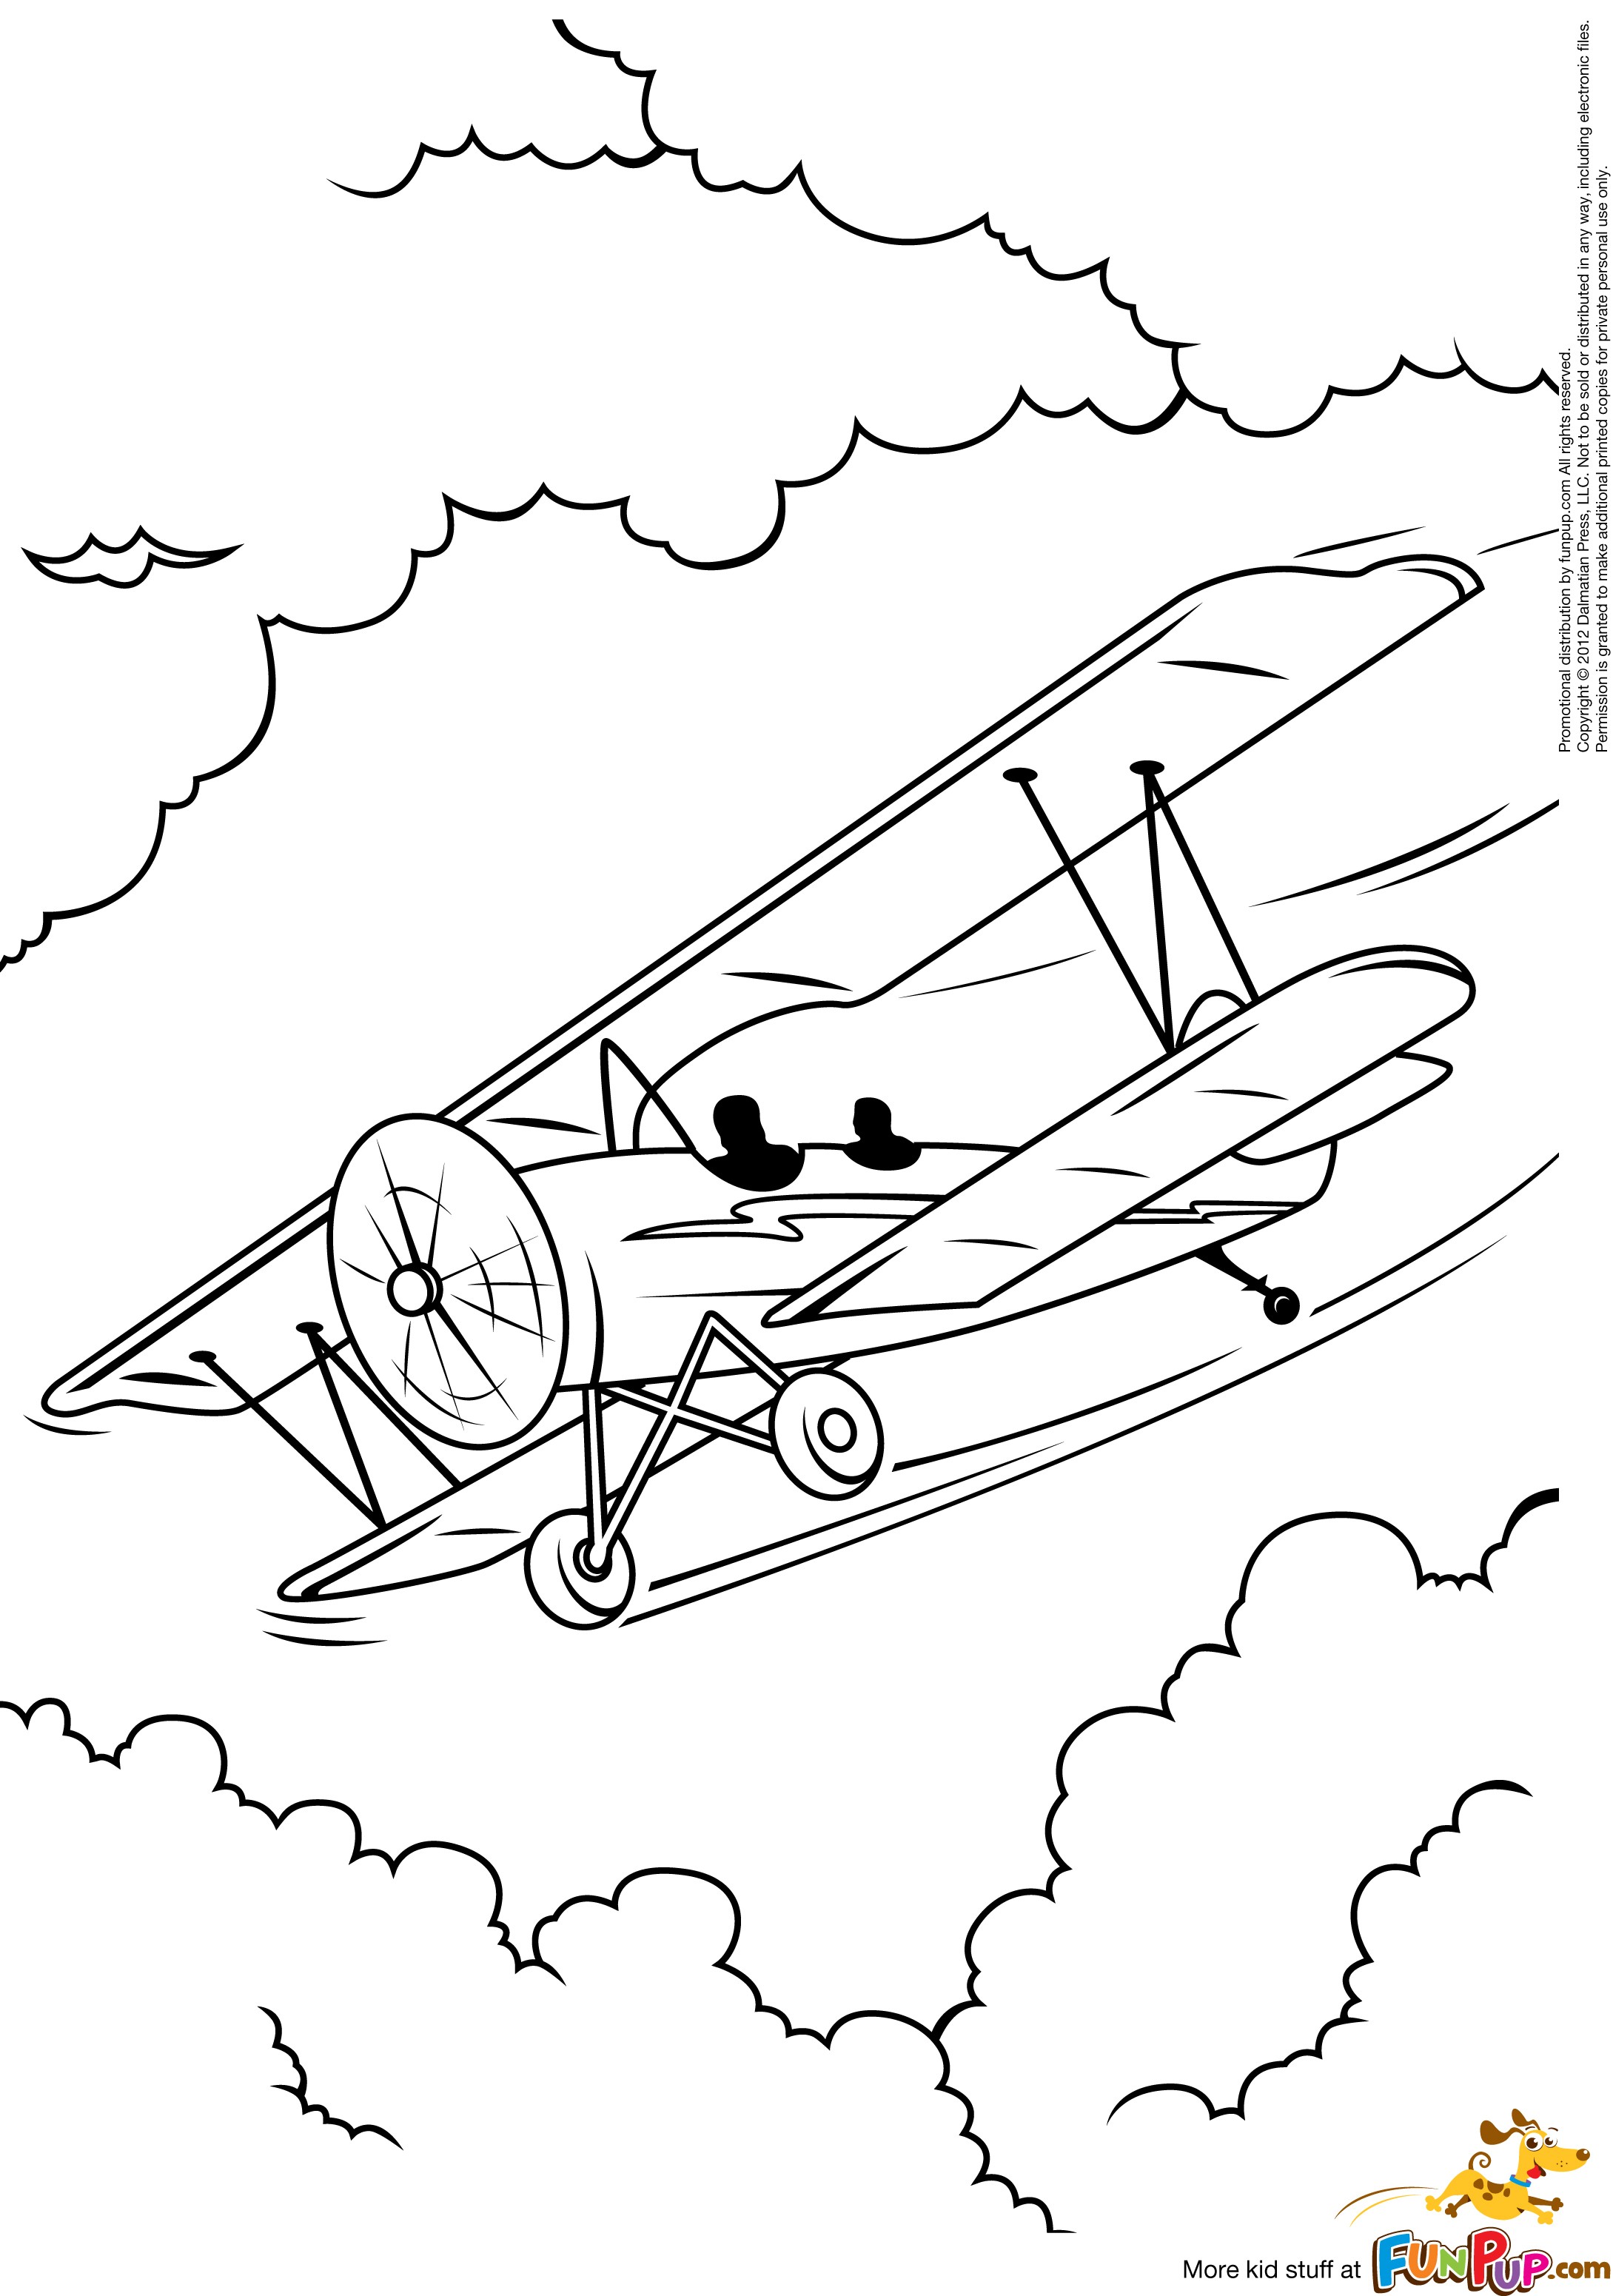  airplane coloring pages | airplanes | airplane tickets | airline airplanes | coloring book | coloring pages for kids | #28